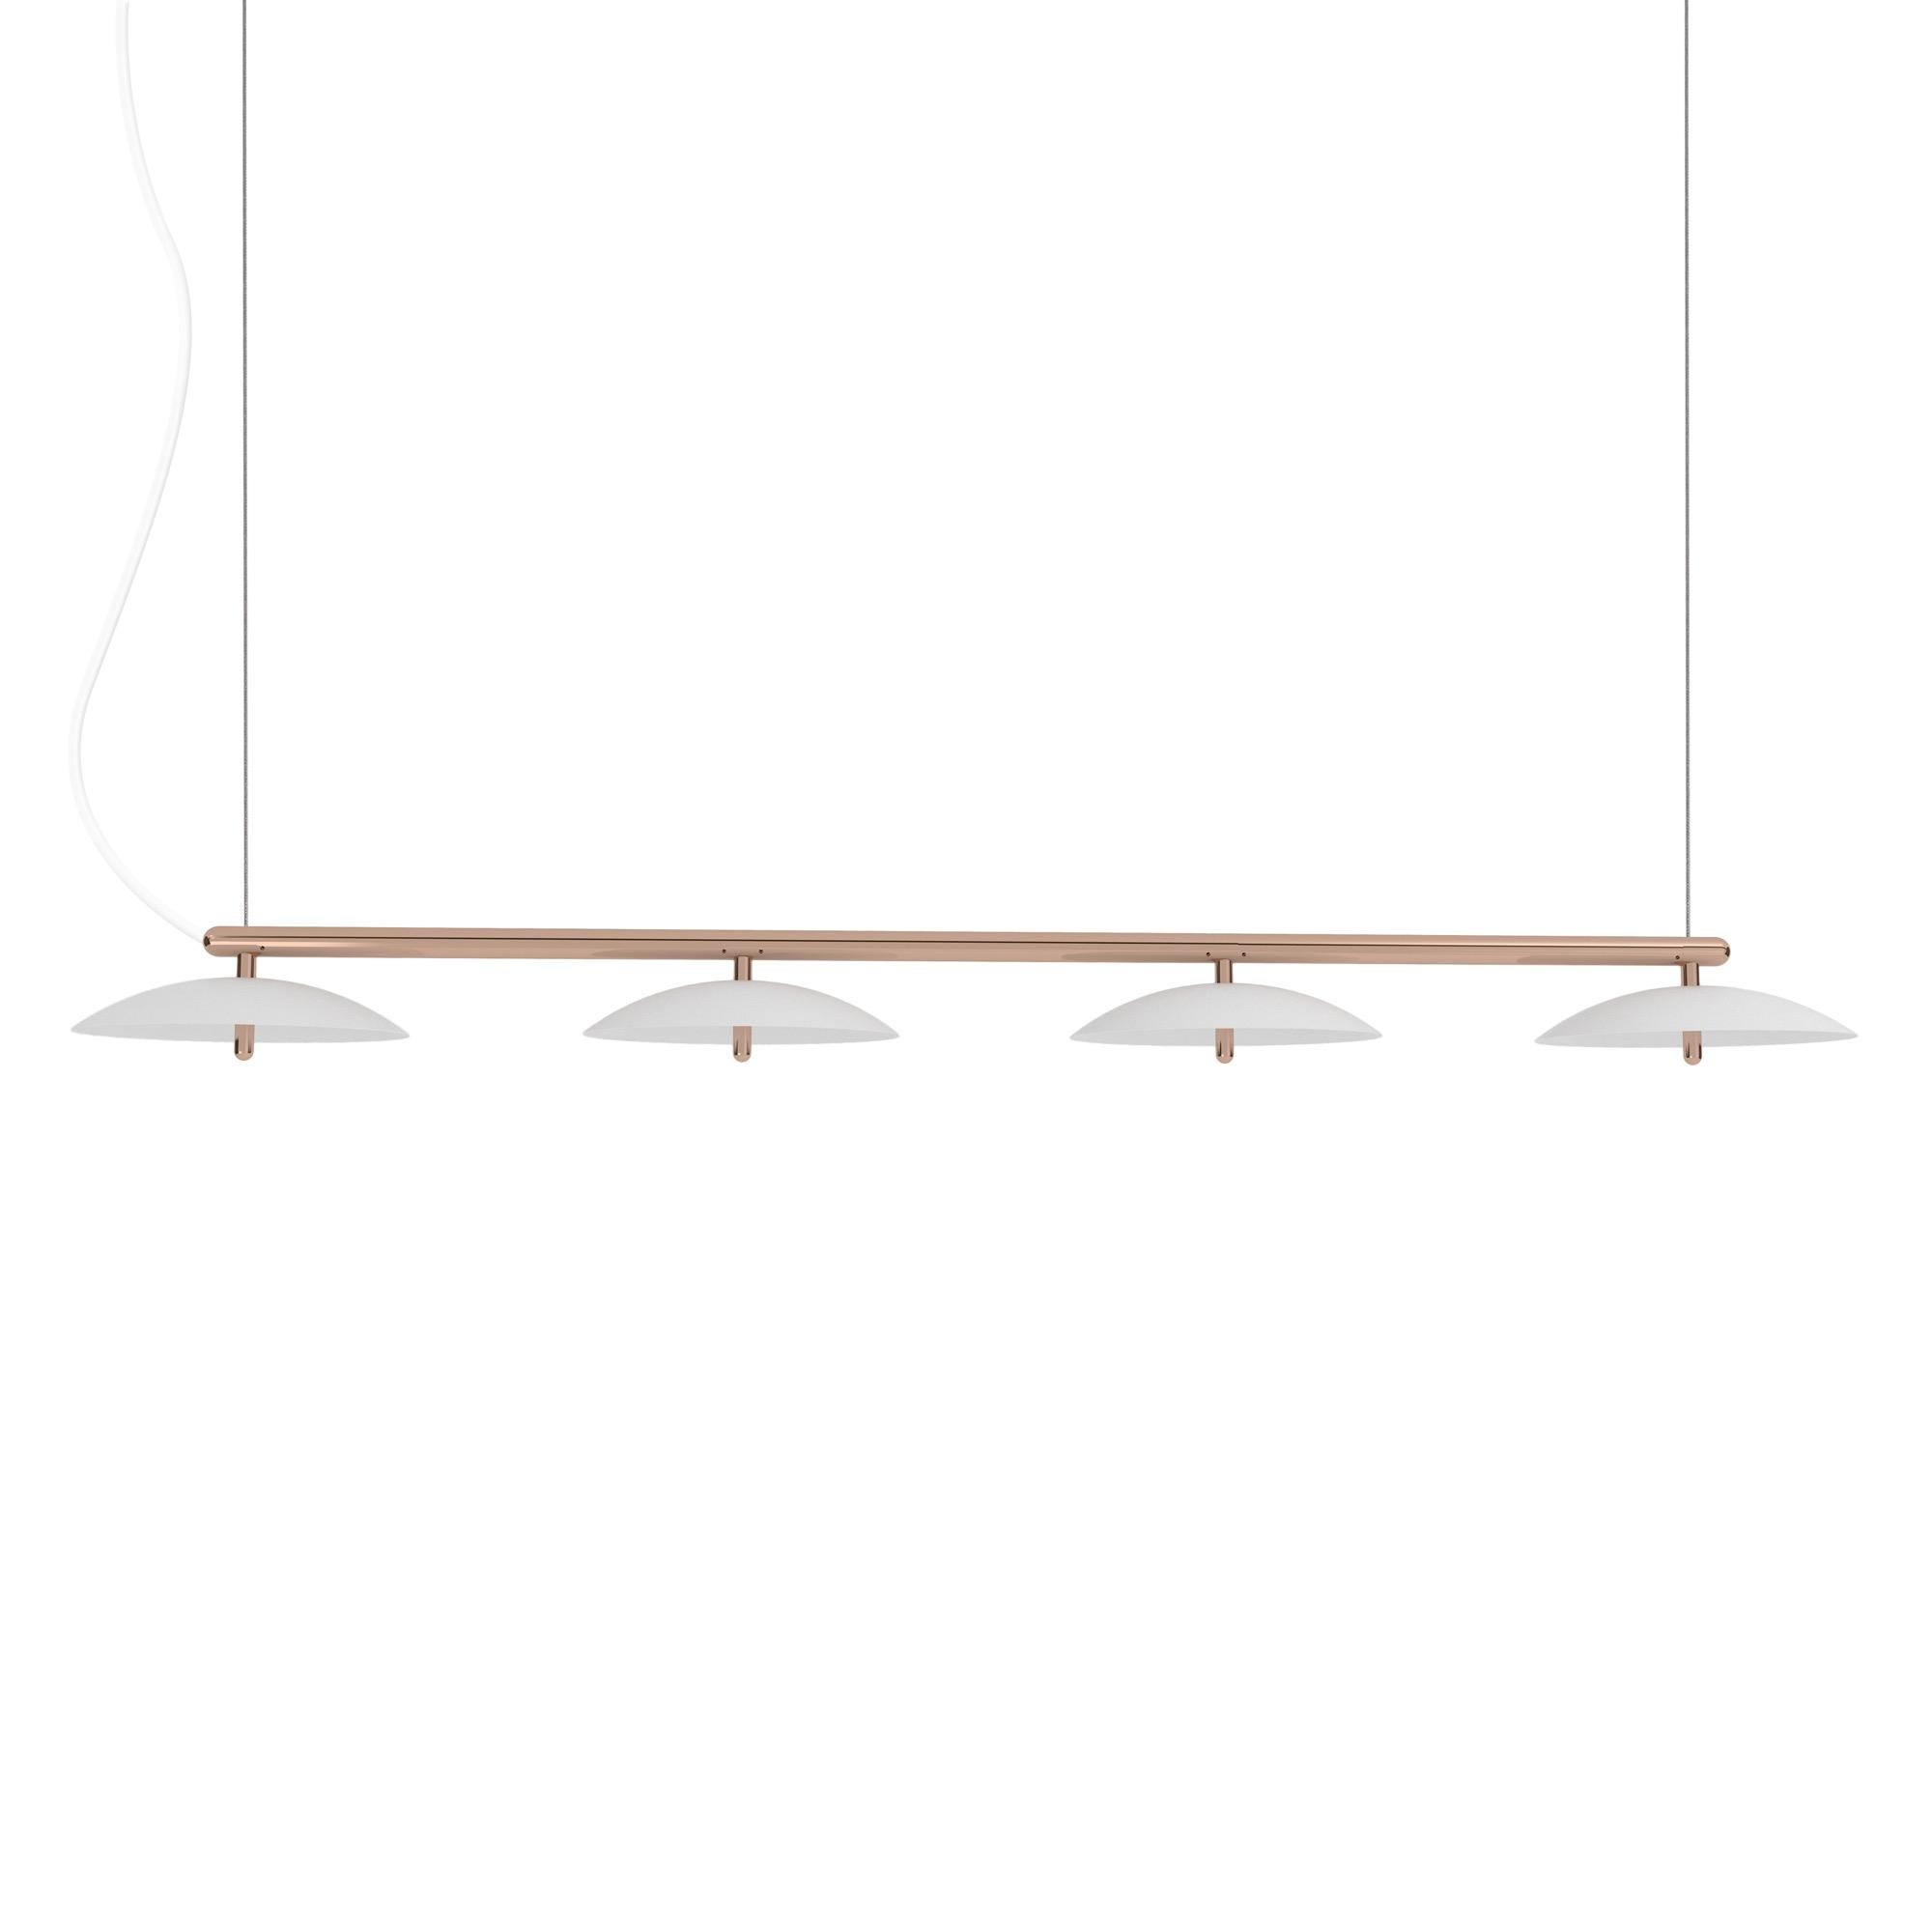 Perfect above a dining table or a conference table, the signal linear pendant is a decidedly modern linear suspension light. A polished metal arm effortlessly supports spun metal shades that cast a downward glow through perforated diffusers.